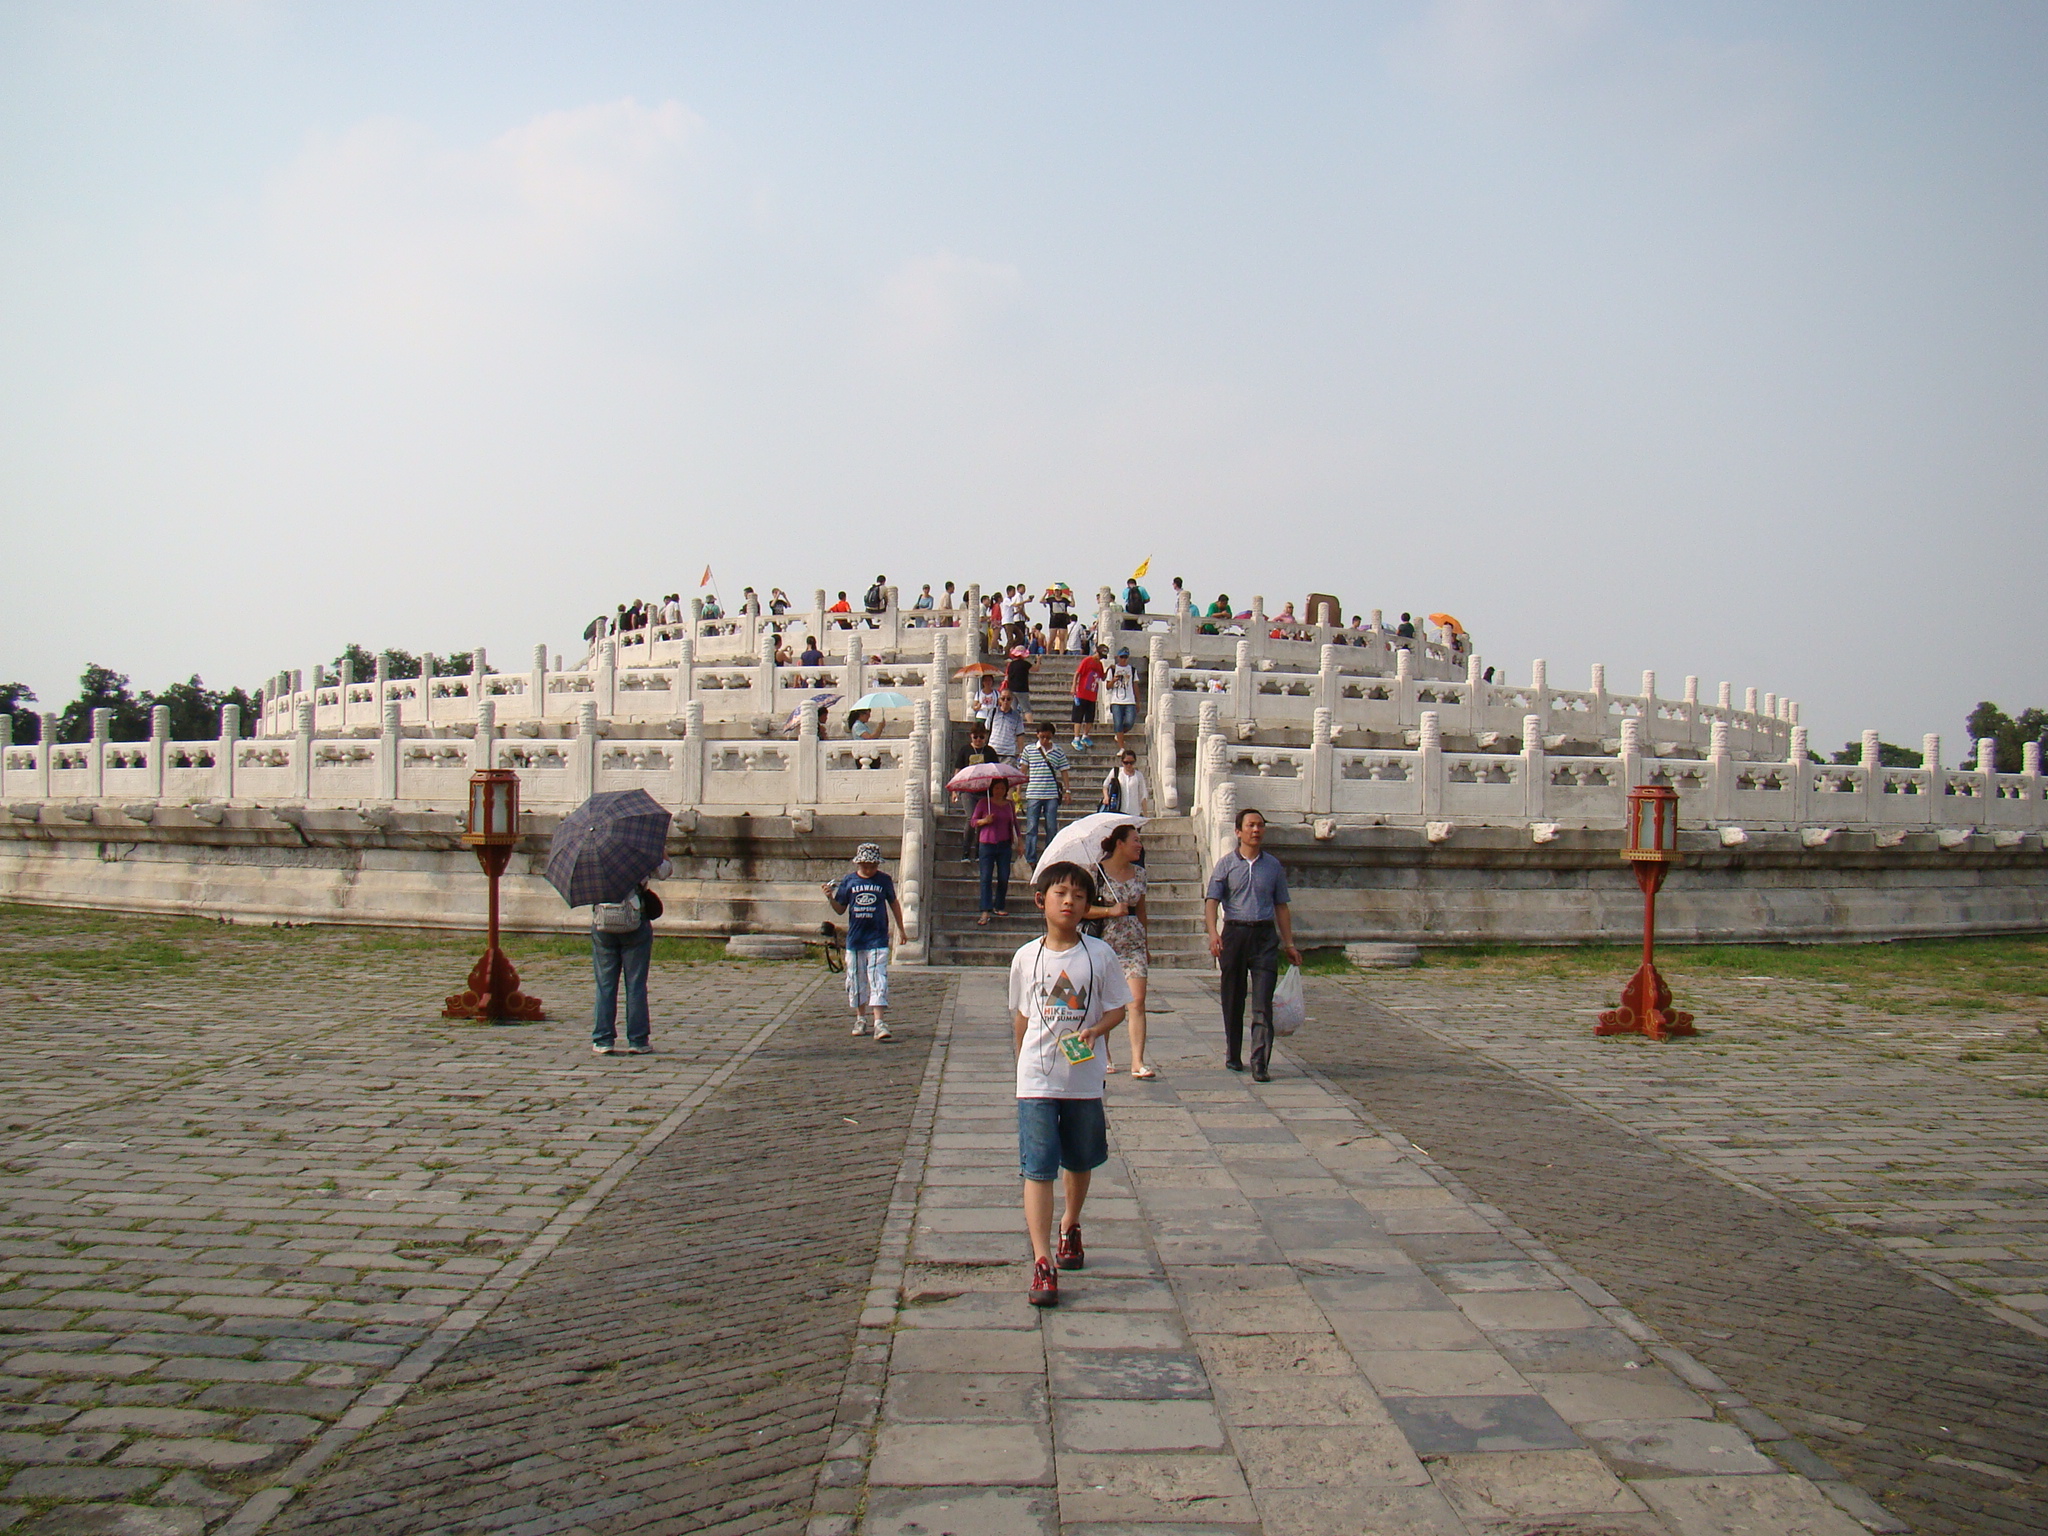 Temple of Heaven where they Sacrificed People for Good Harvests